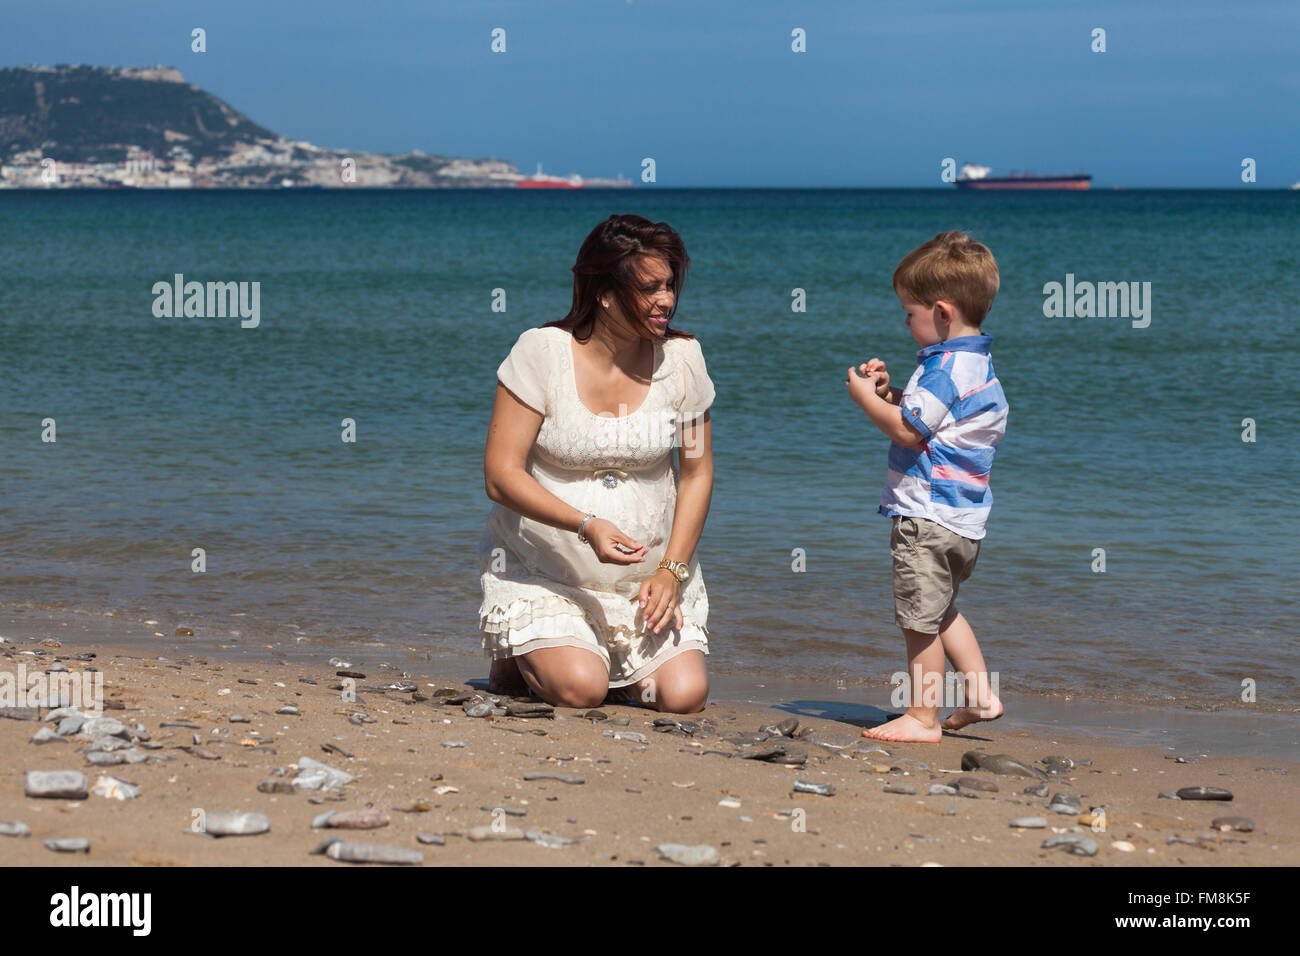 Happy pregnant woman playing with child boy and enjoying sunny day on the beach in Spain. Stock Photo